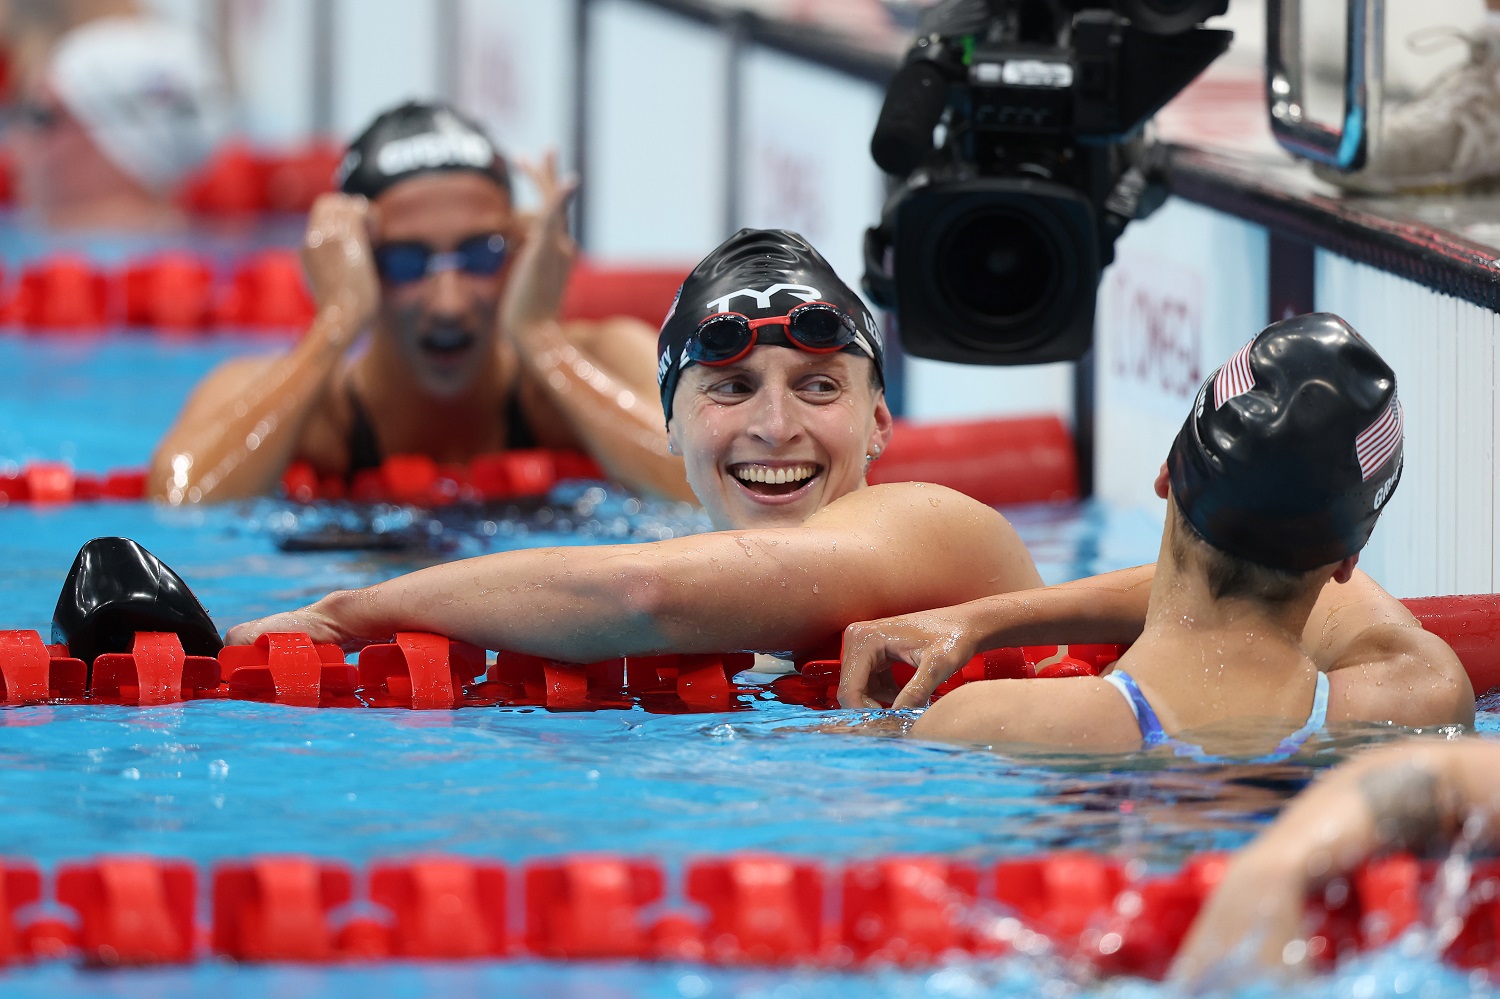 Gold medalist Katie Ledecky looks on after competing in the women's 800-meter Freestyle final at Tokyo Aquatics Centre on July 31, 2021. | Tom Pennington/Getty Images